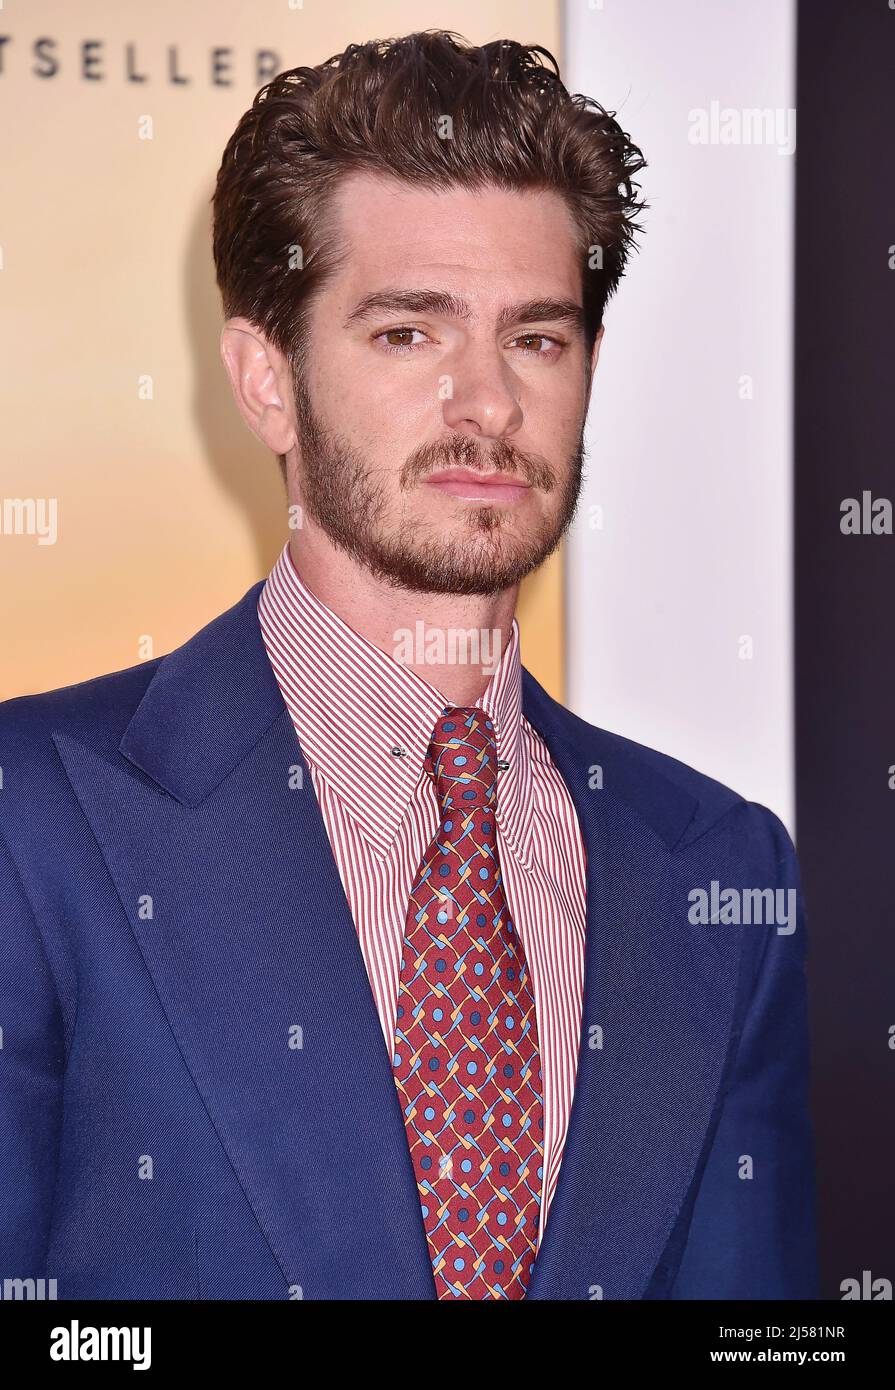 HOLLYWOOD, CA - APRIL 20: Andrew Garfield attends Premiere Of FX's "Under The Banner Of Heaven" at The Hollywood Athletic Club on April 20, 2022 in Ho Stock Photo